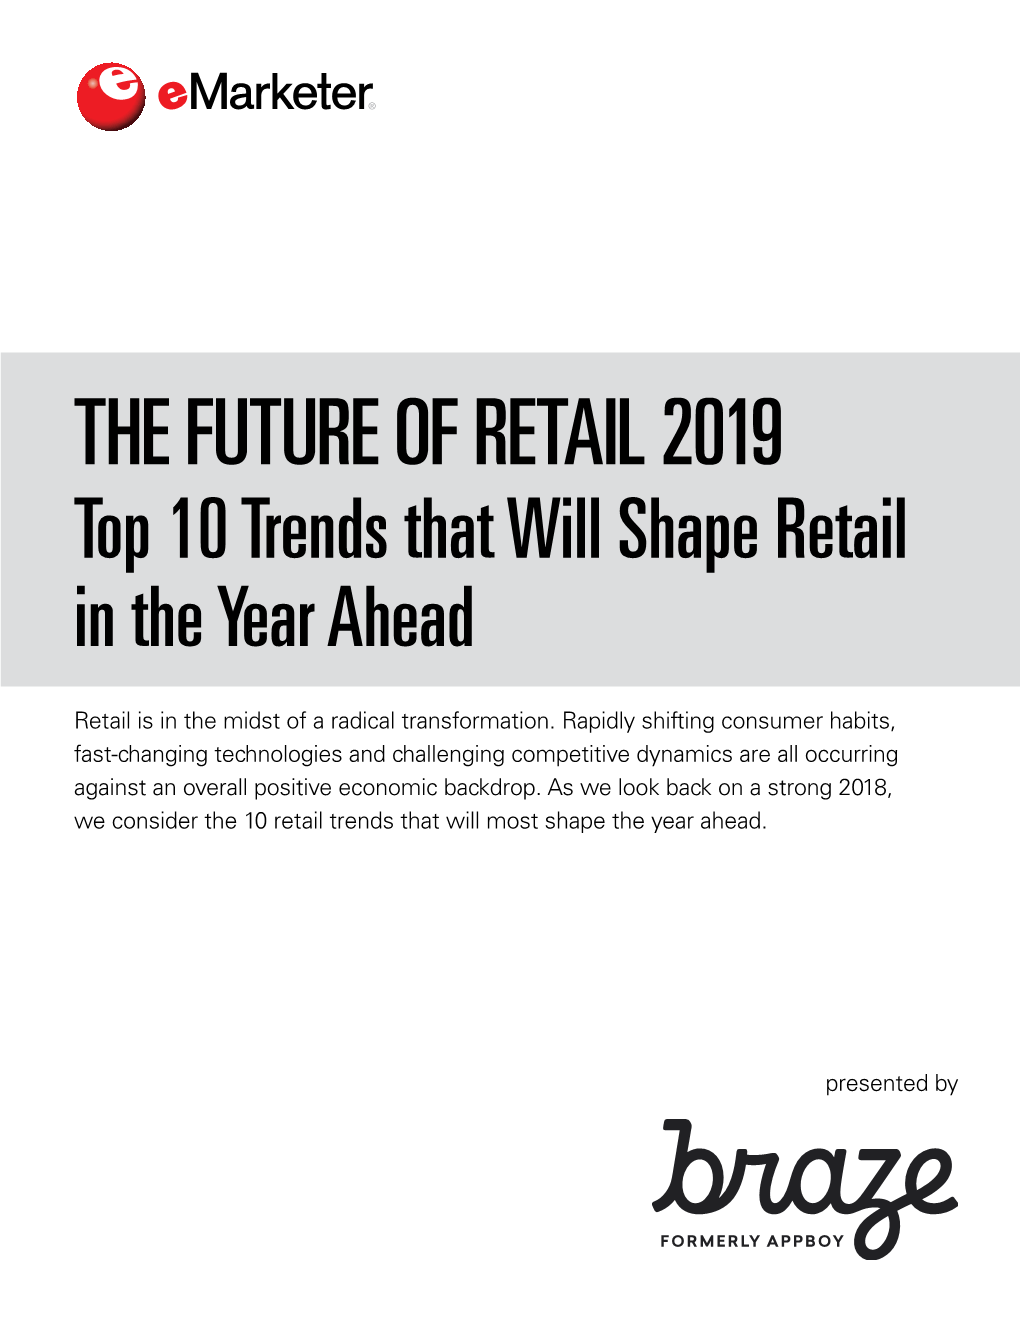 THE FUTURE of RETAIL 2019 Top 10 Trends That Will Shape Retail in the Year Ahead